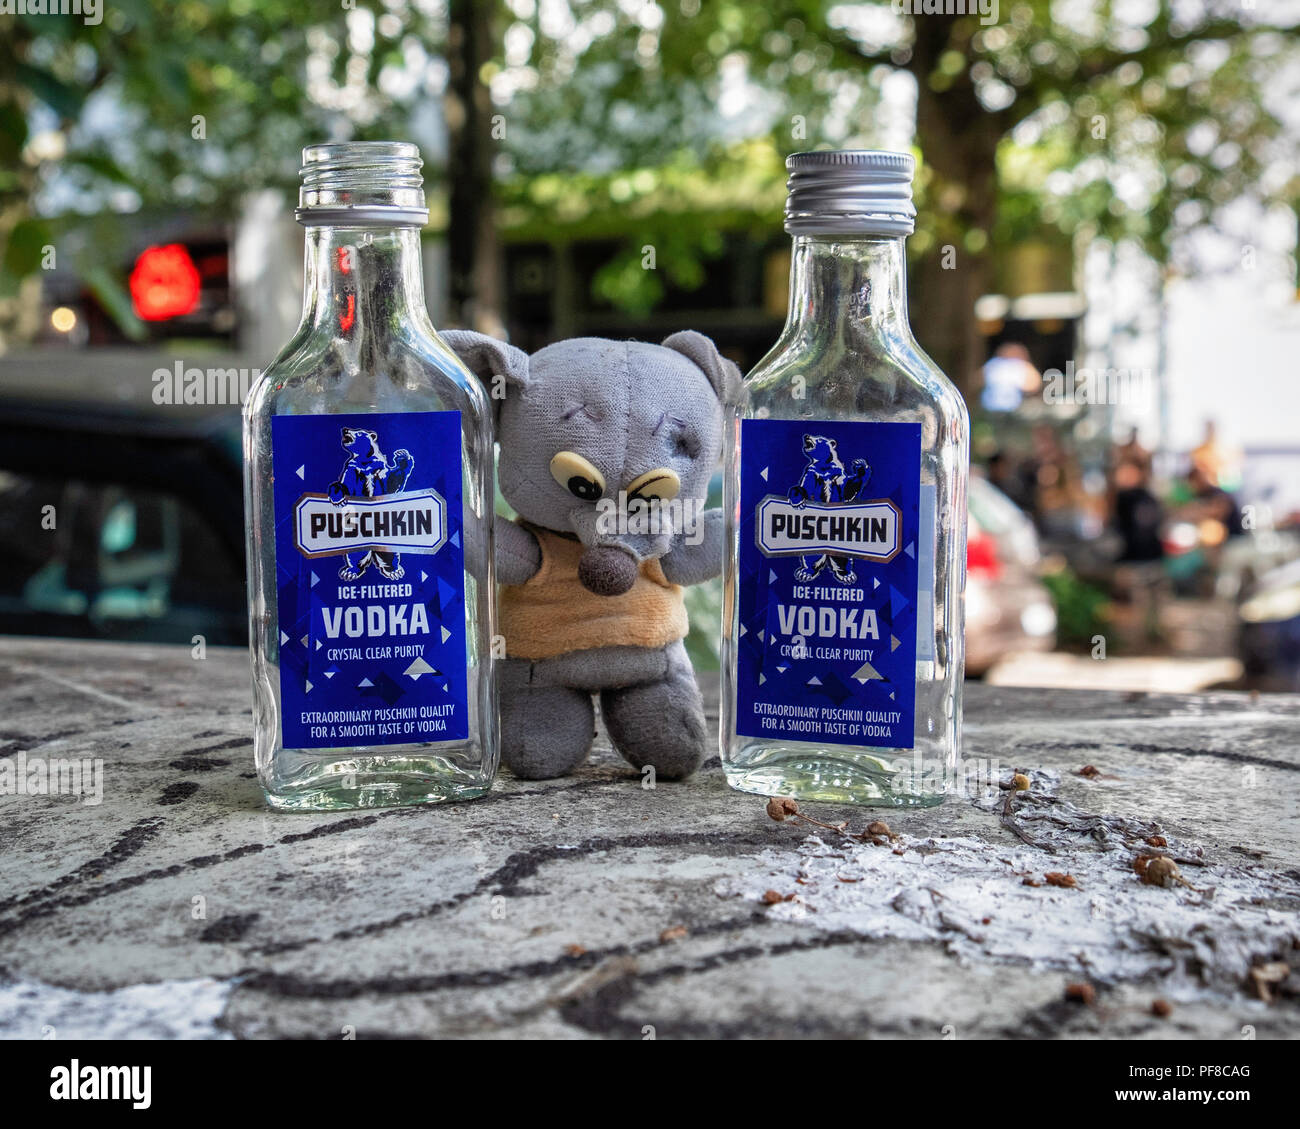 Urban Still life - Small fluffy toy and two empty vodka bottles on a city bin..child's toy misplaced, lost or abandoned? Stock Photo